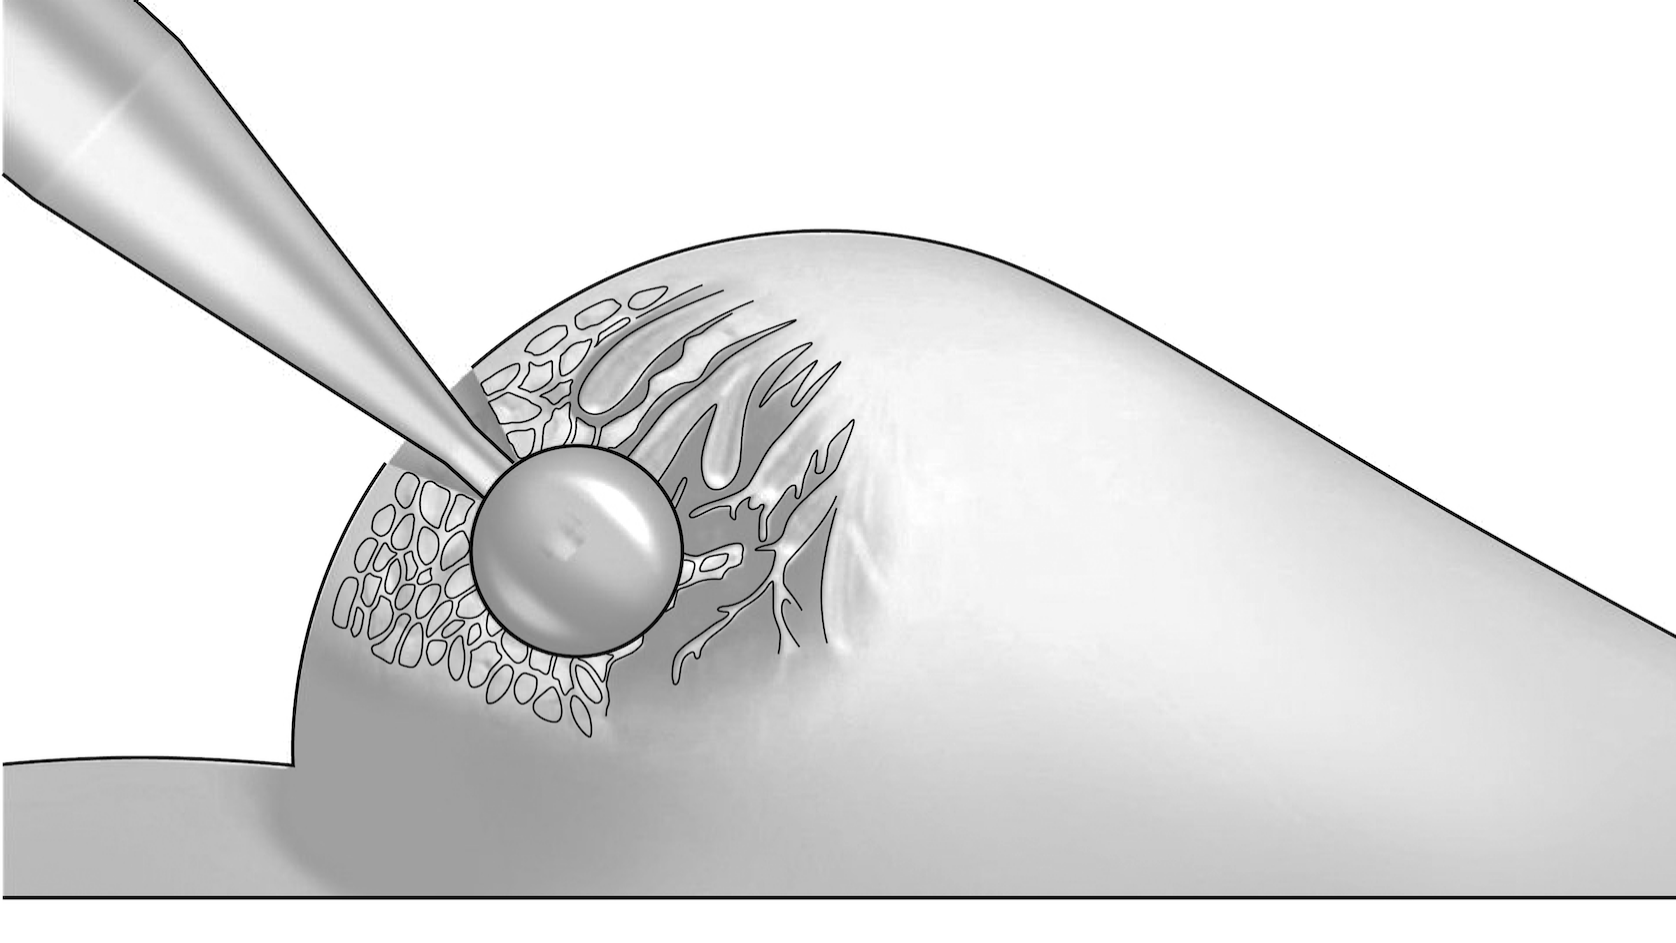 The suitable applicator is determined and positioned in the tumor cavity.